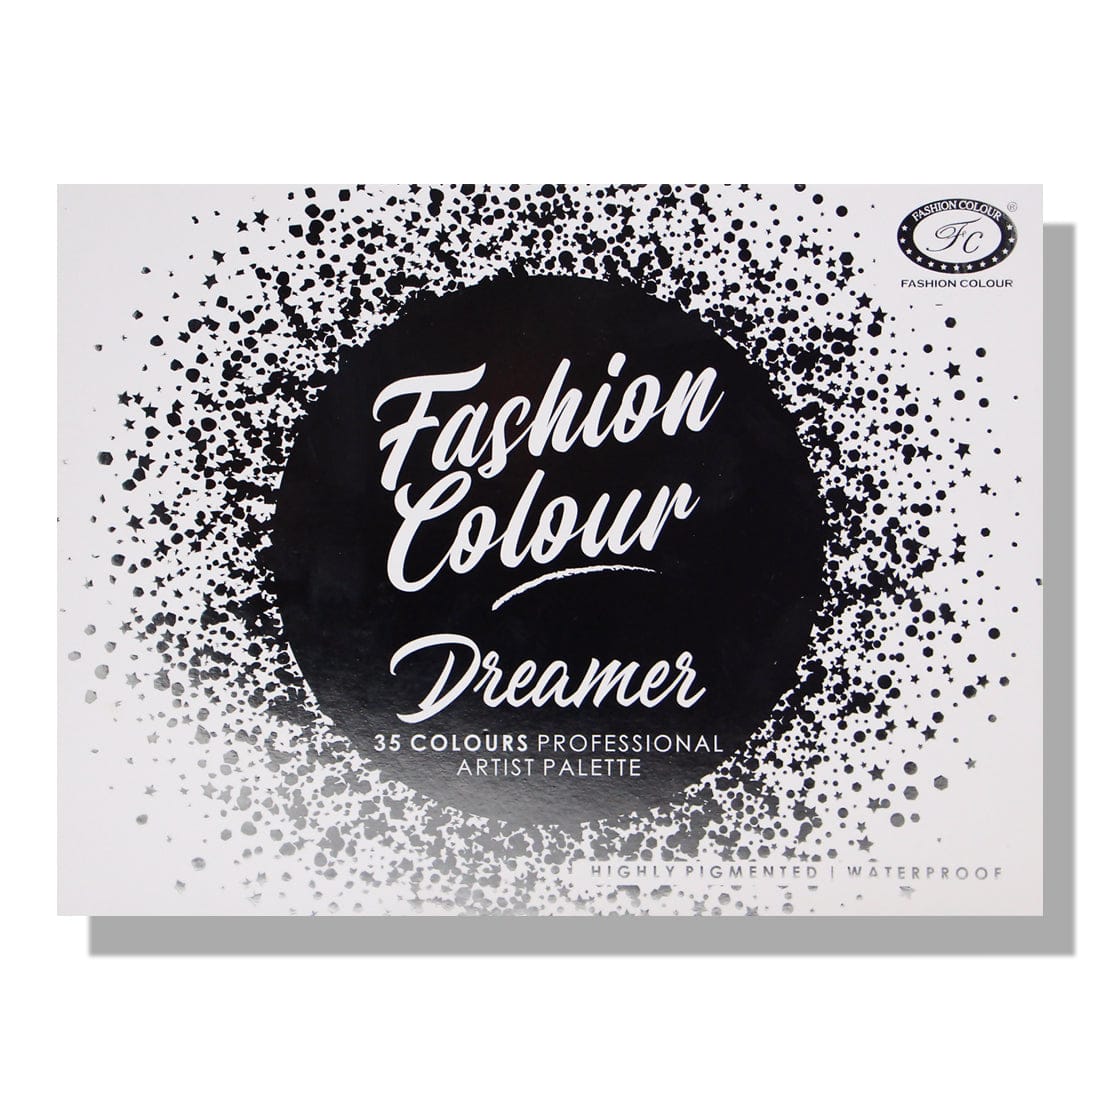 Introducing Fashion Colour Dreamer 35 colors professional artist palette from rich pigments, ultra-vibrant shimmers to super blendable matte colors, show off your inner-self and true colors.